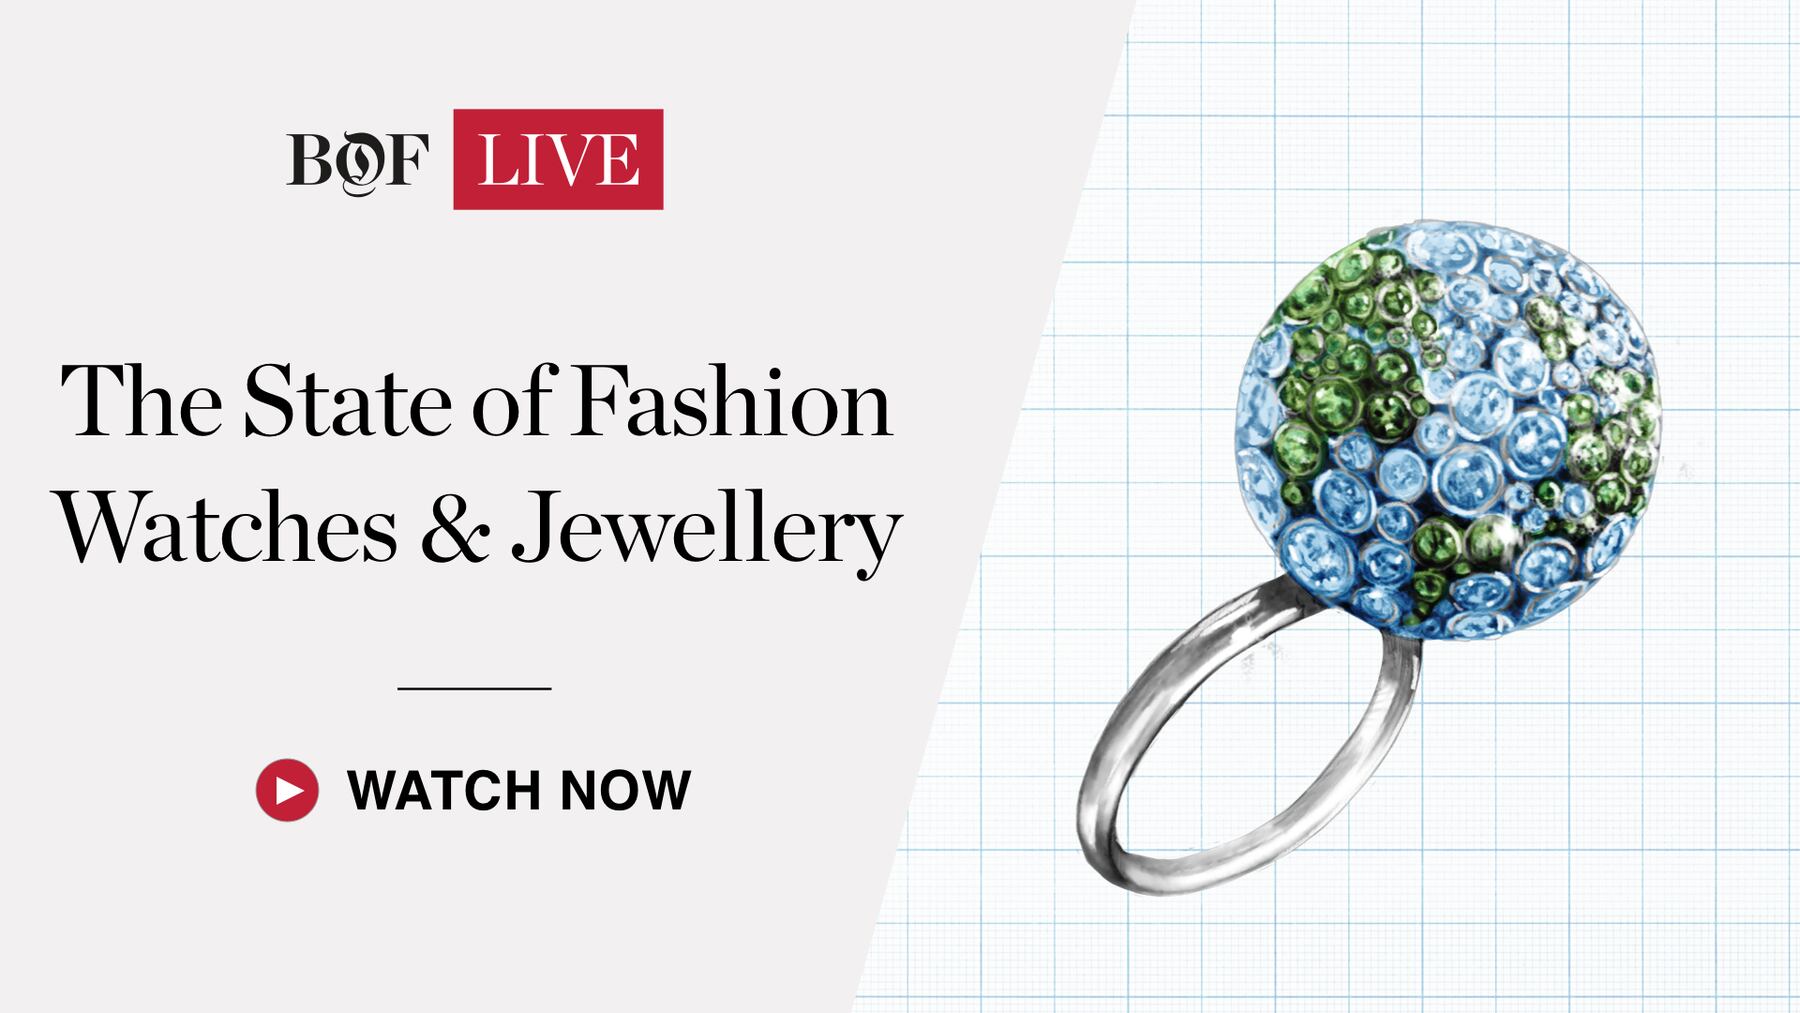 The State of Fashion Watches & Jewellery. BoF.